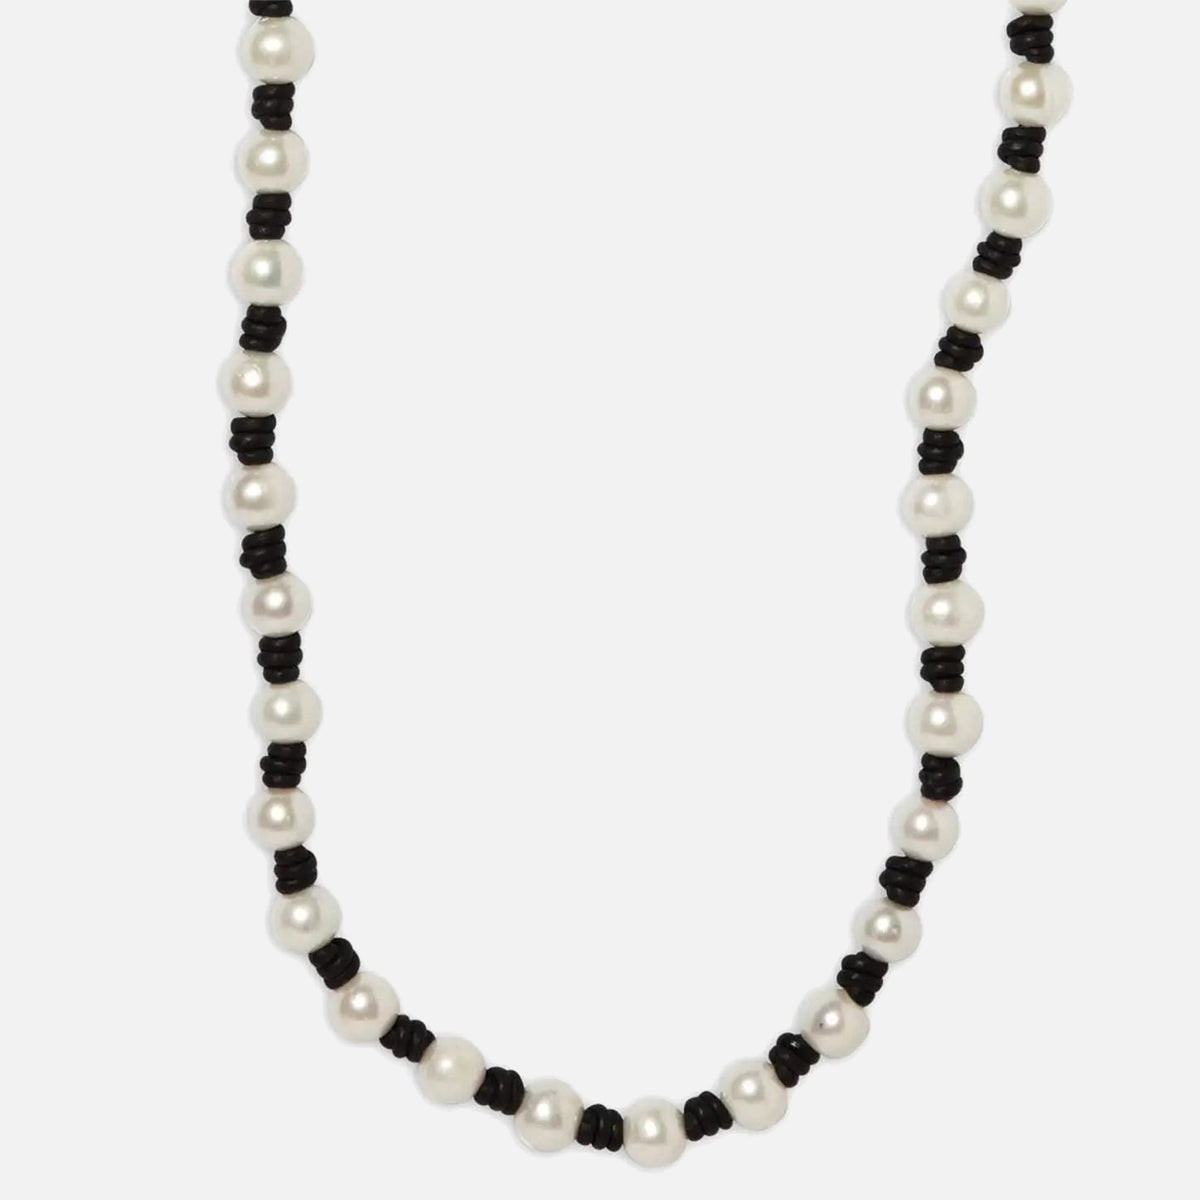 Long Knotted 10MM Pearl and Leather Necklace with Tail